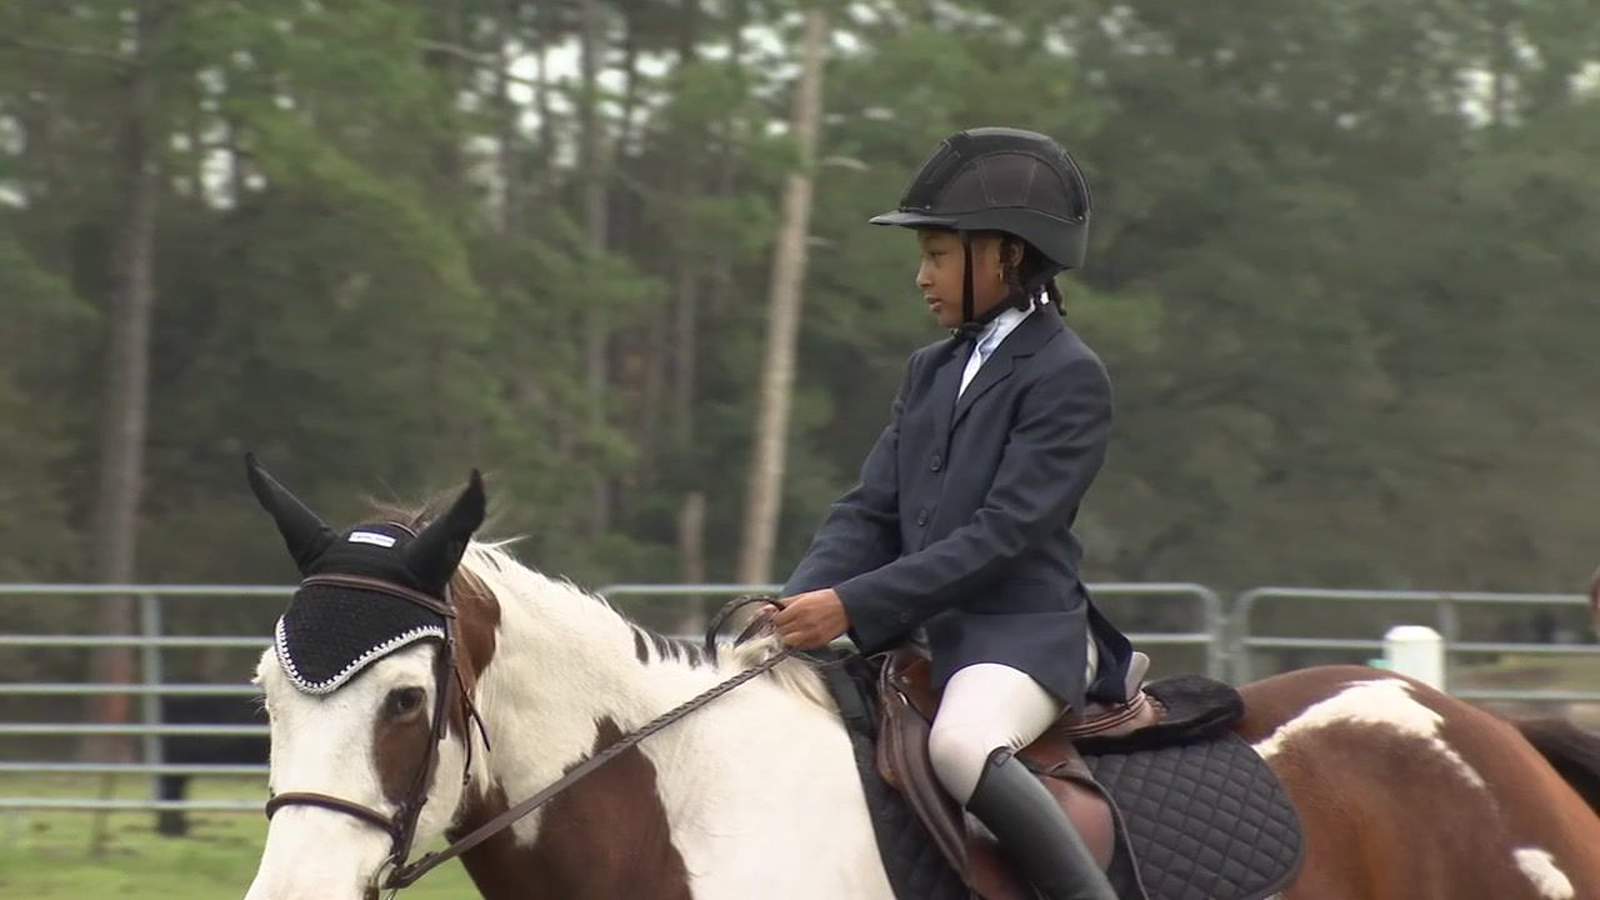 Young equestrian helping raise awareness that competitive riding needs to be more diverse